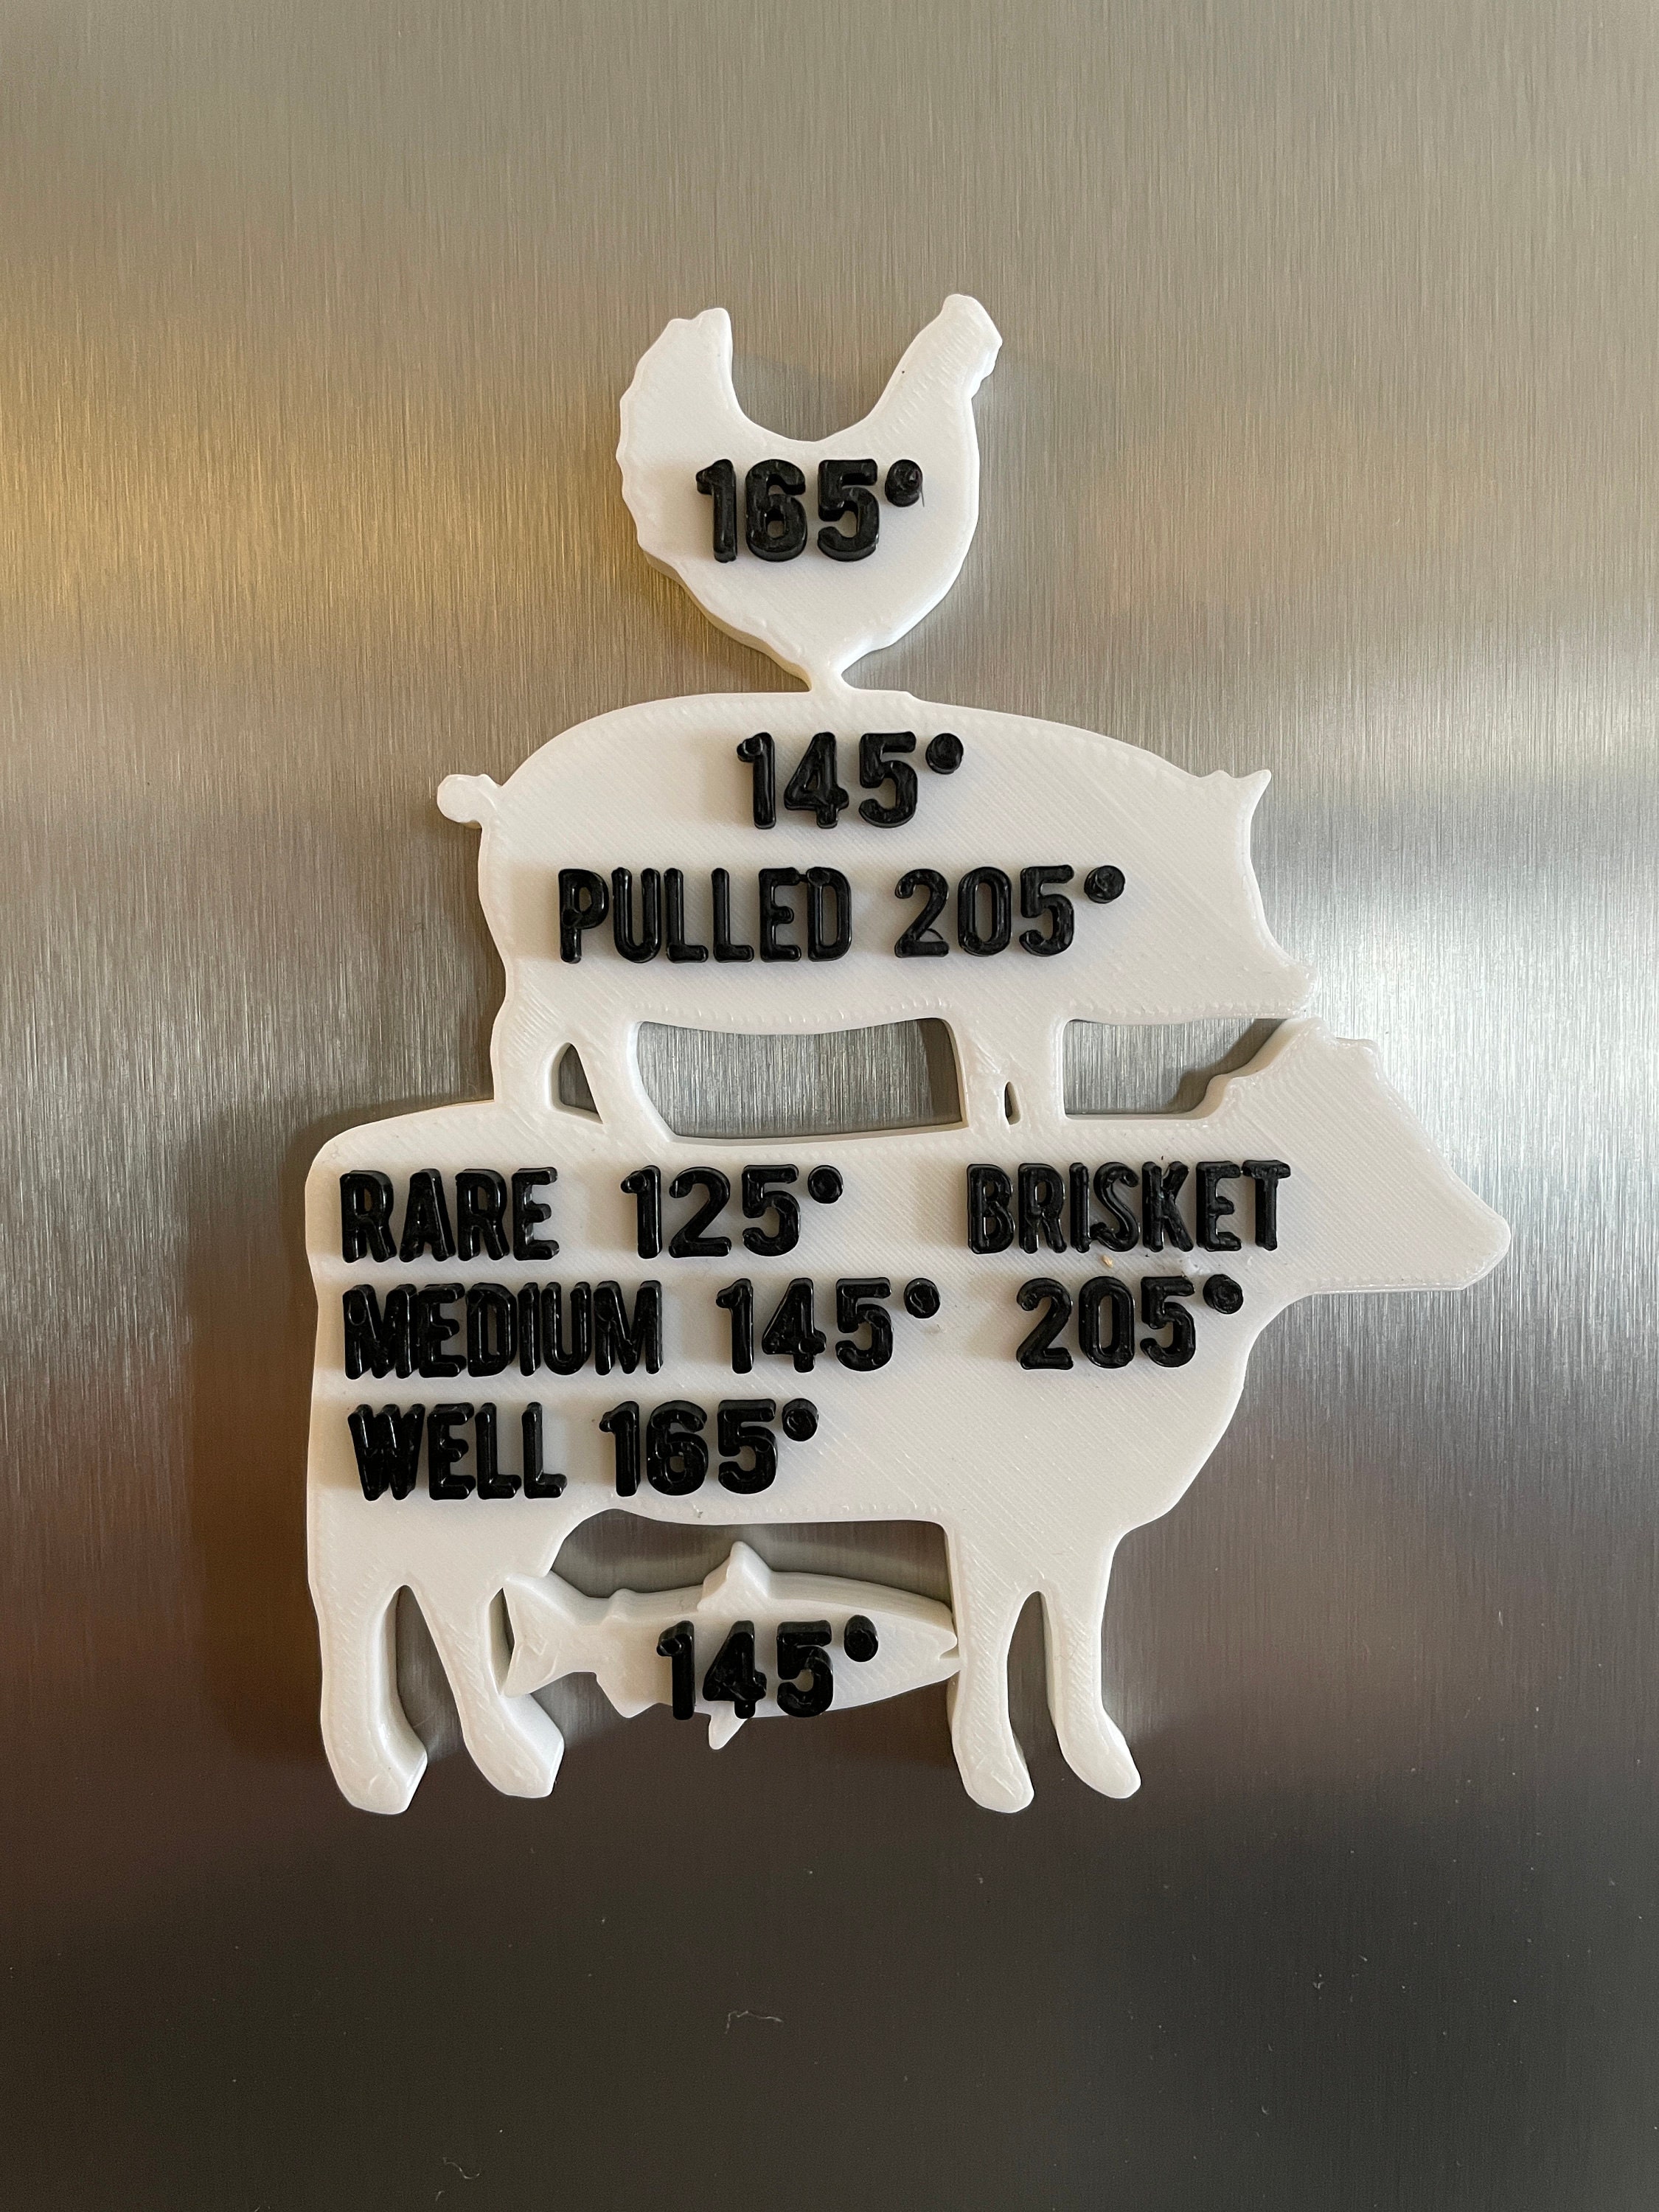  Meat Temperature Guide Magnet by Grill Your As* Off - Magnetic Temperature  Chart for Beef, Pork, Fish, Poultry - Rare to Well Done - Easy to Read and  Use - Ideal